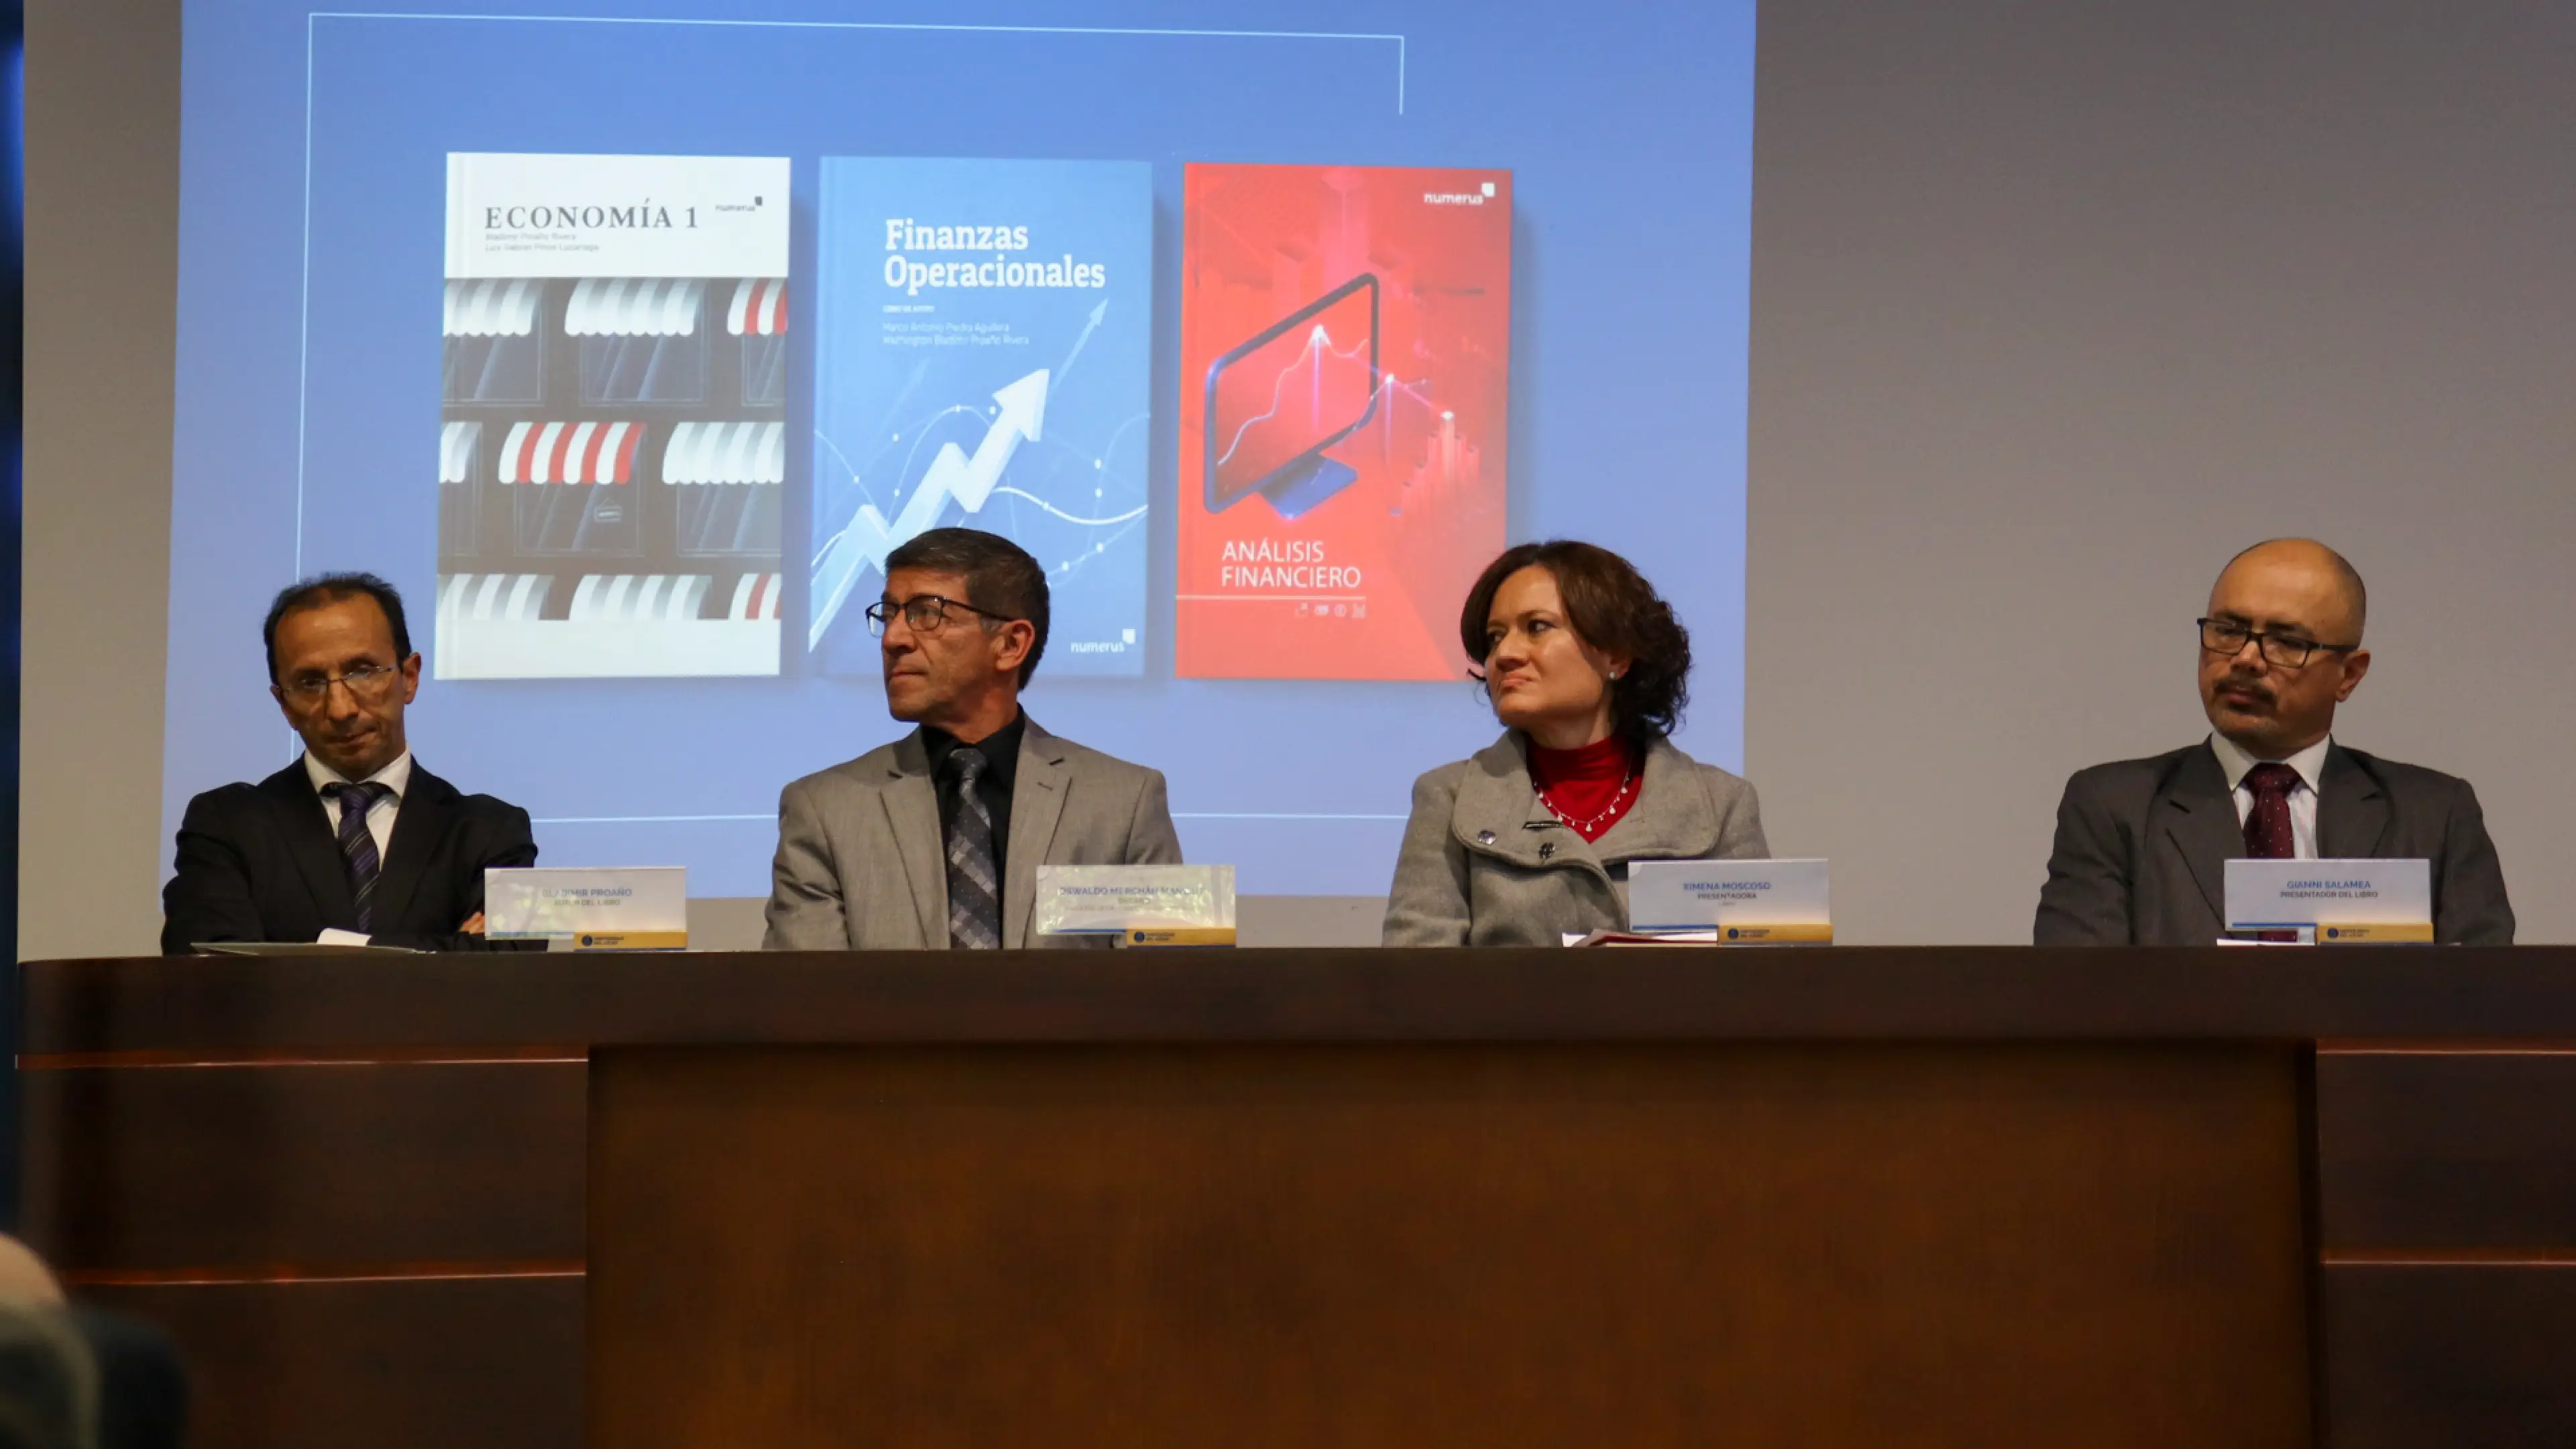 Presentation of the books: Financial Analysis, Operational Finance and Economics 1. An academic contribution for students and professionals in the business world